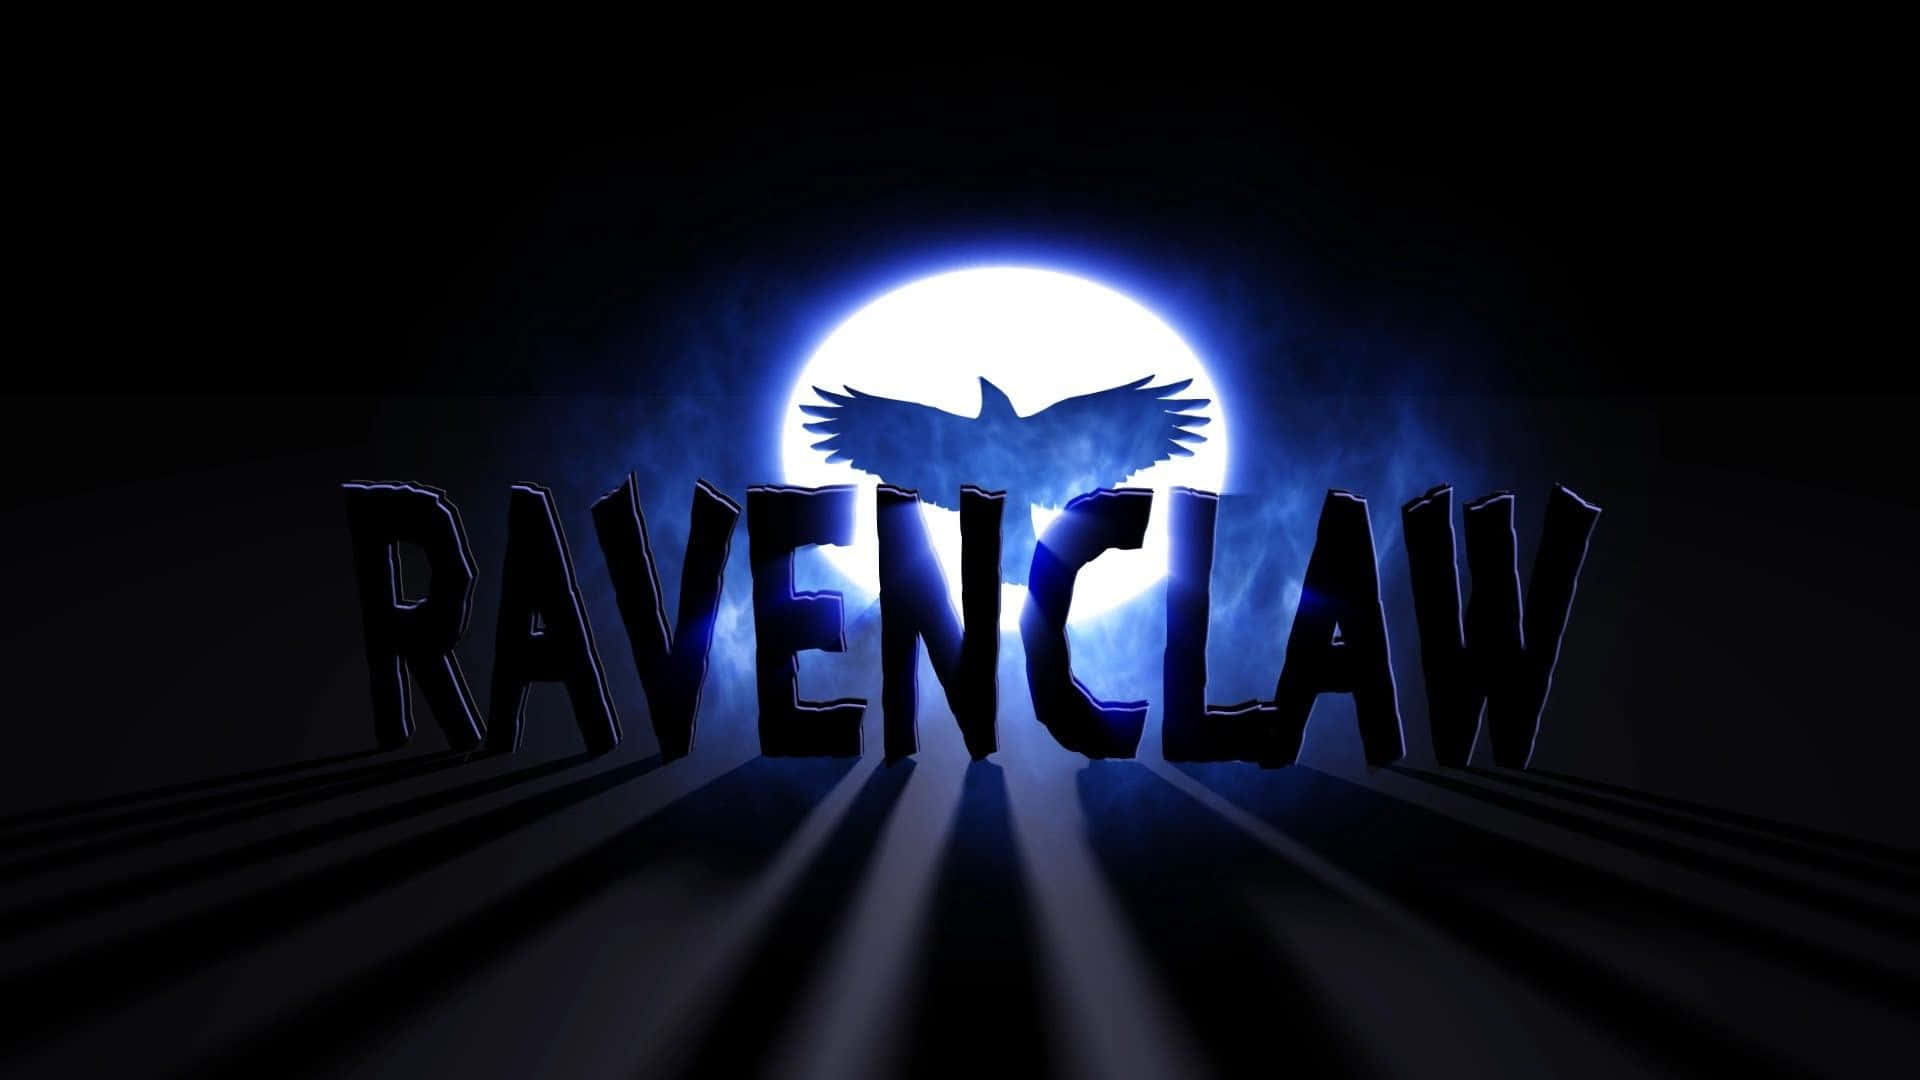 Proudly Representing Ravenclaw in the Harry Potter Films! Wallpaper